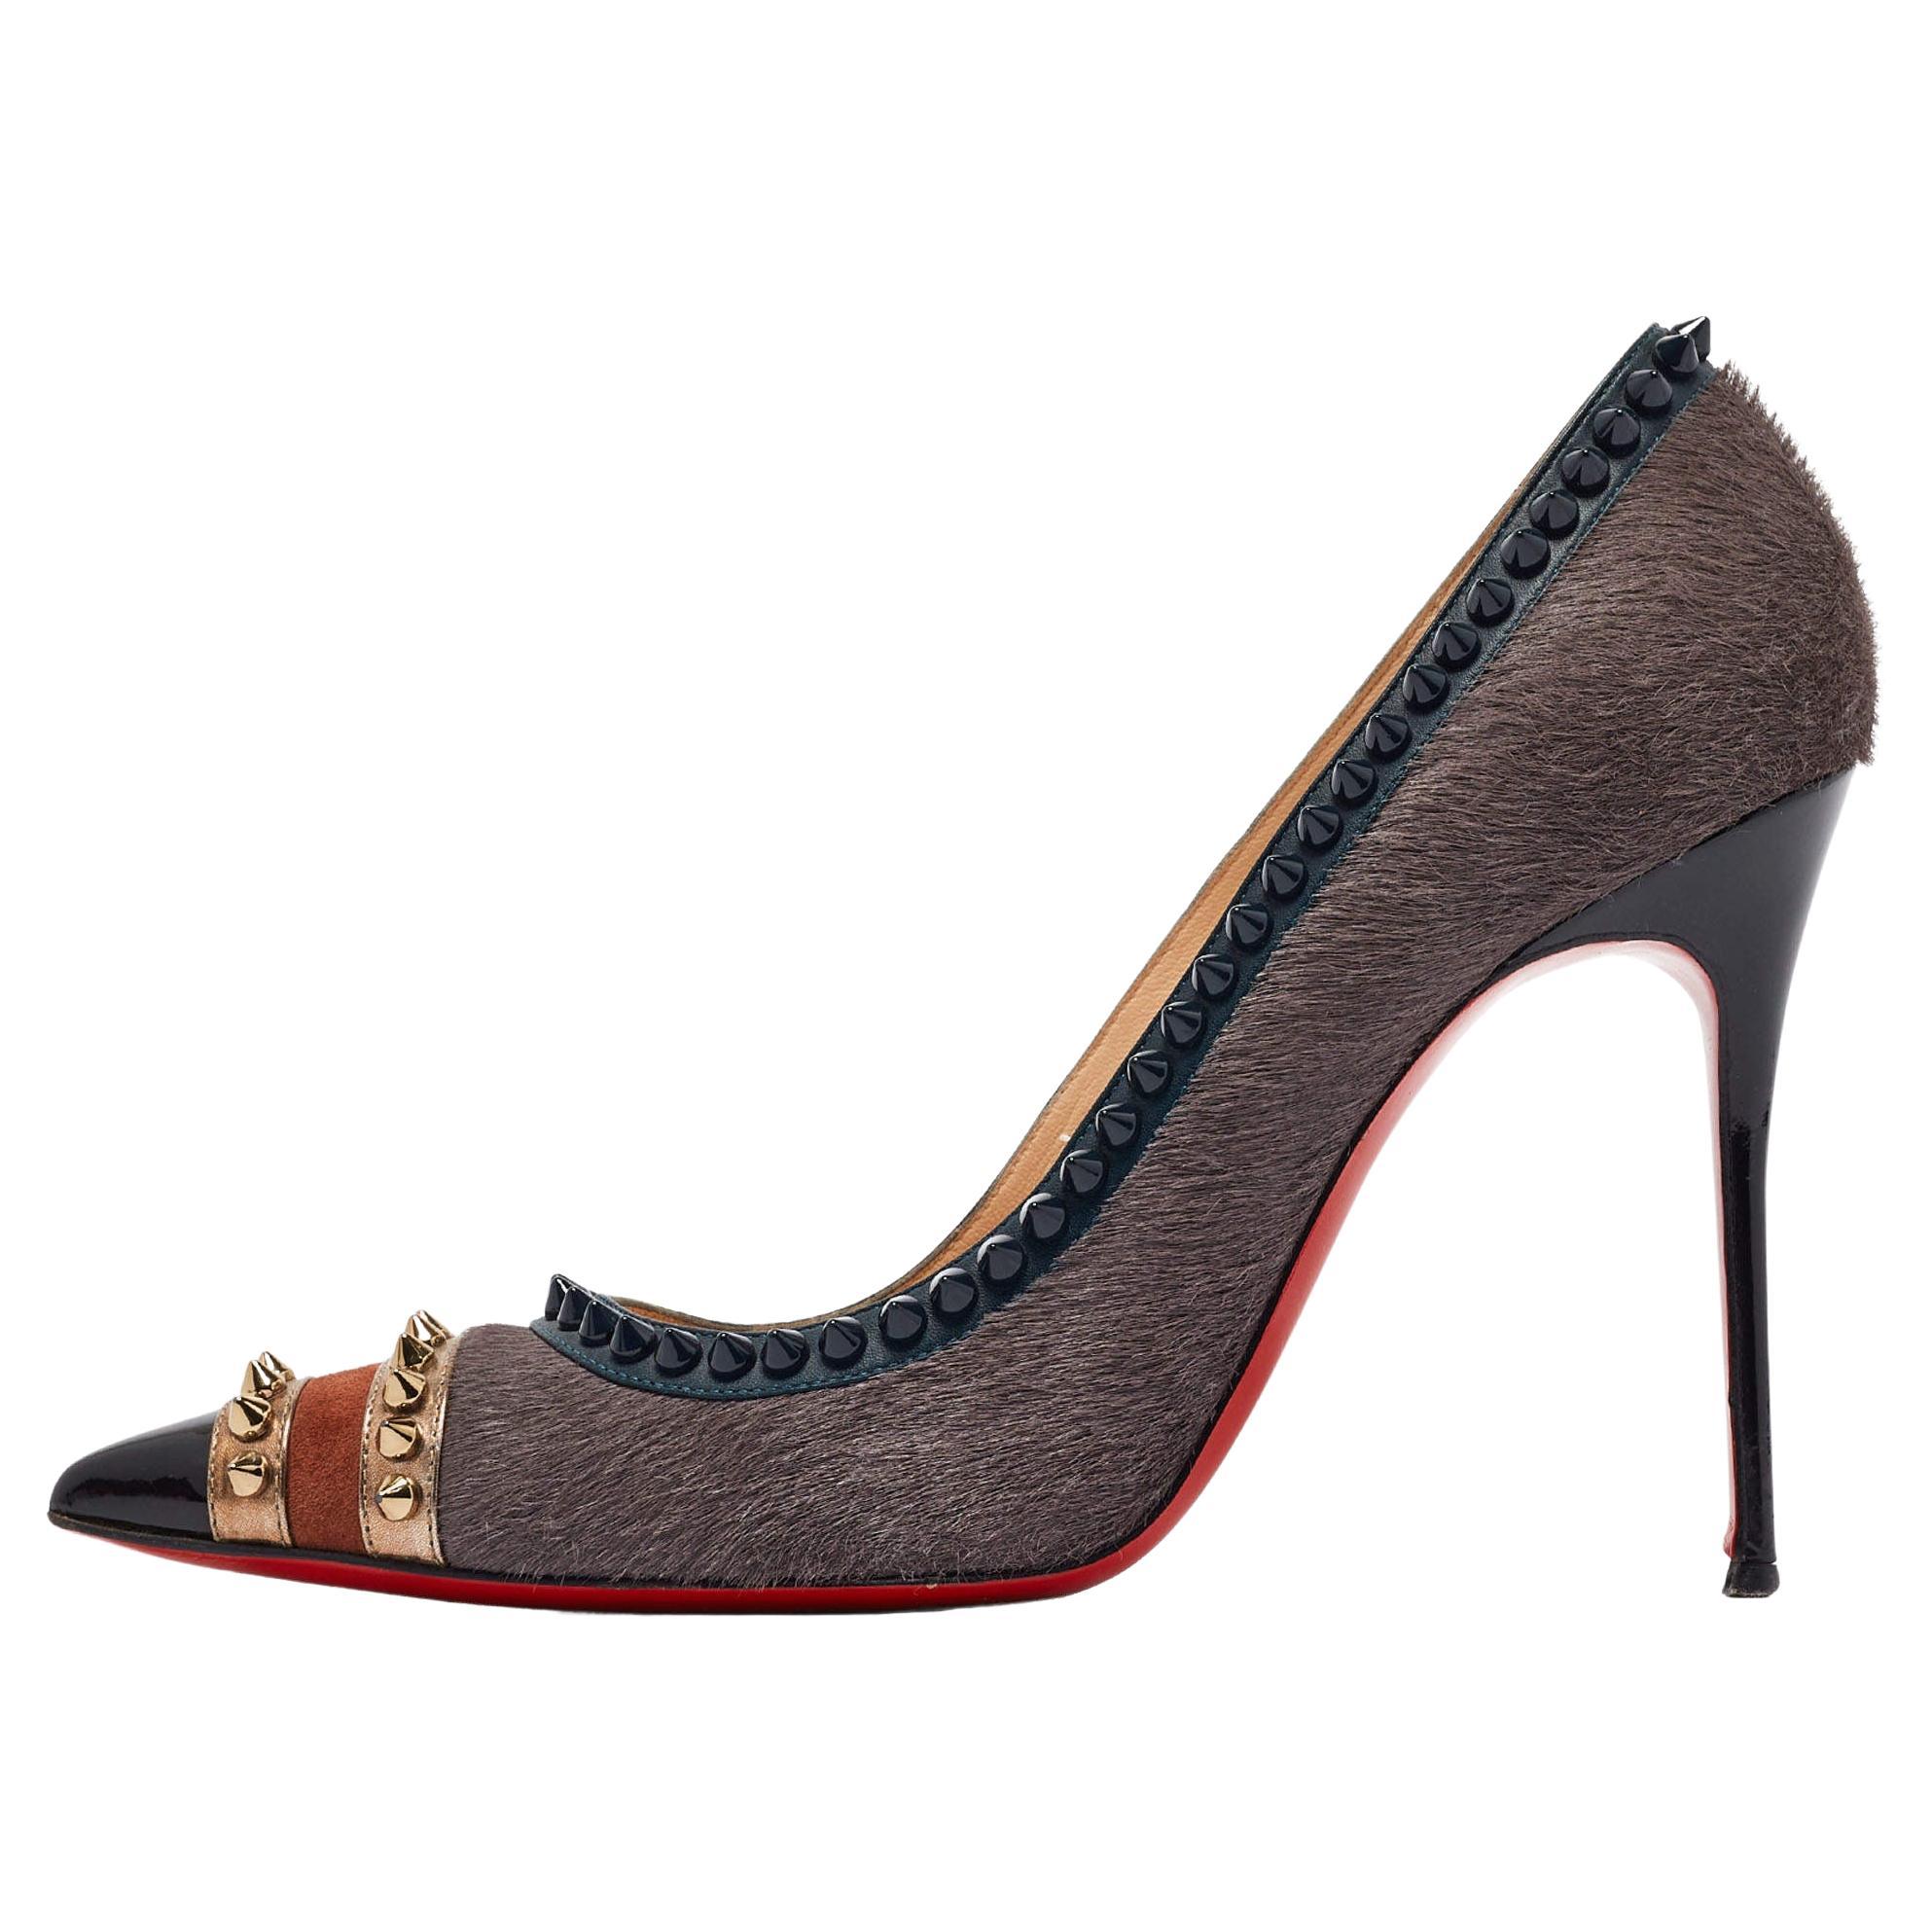 Christian Louboutin Multicolor Calf Hair and Leather Malabar Hill Spiked Pointed For Sale